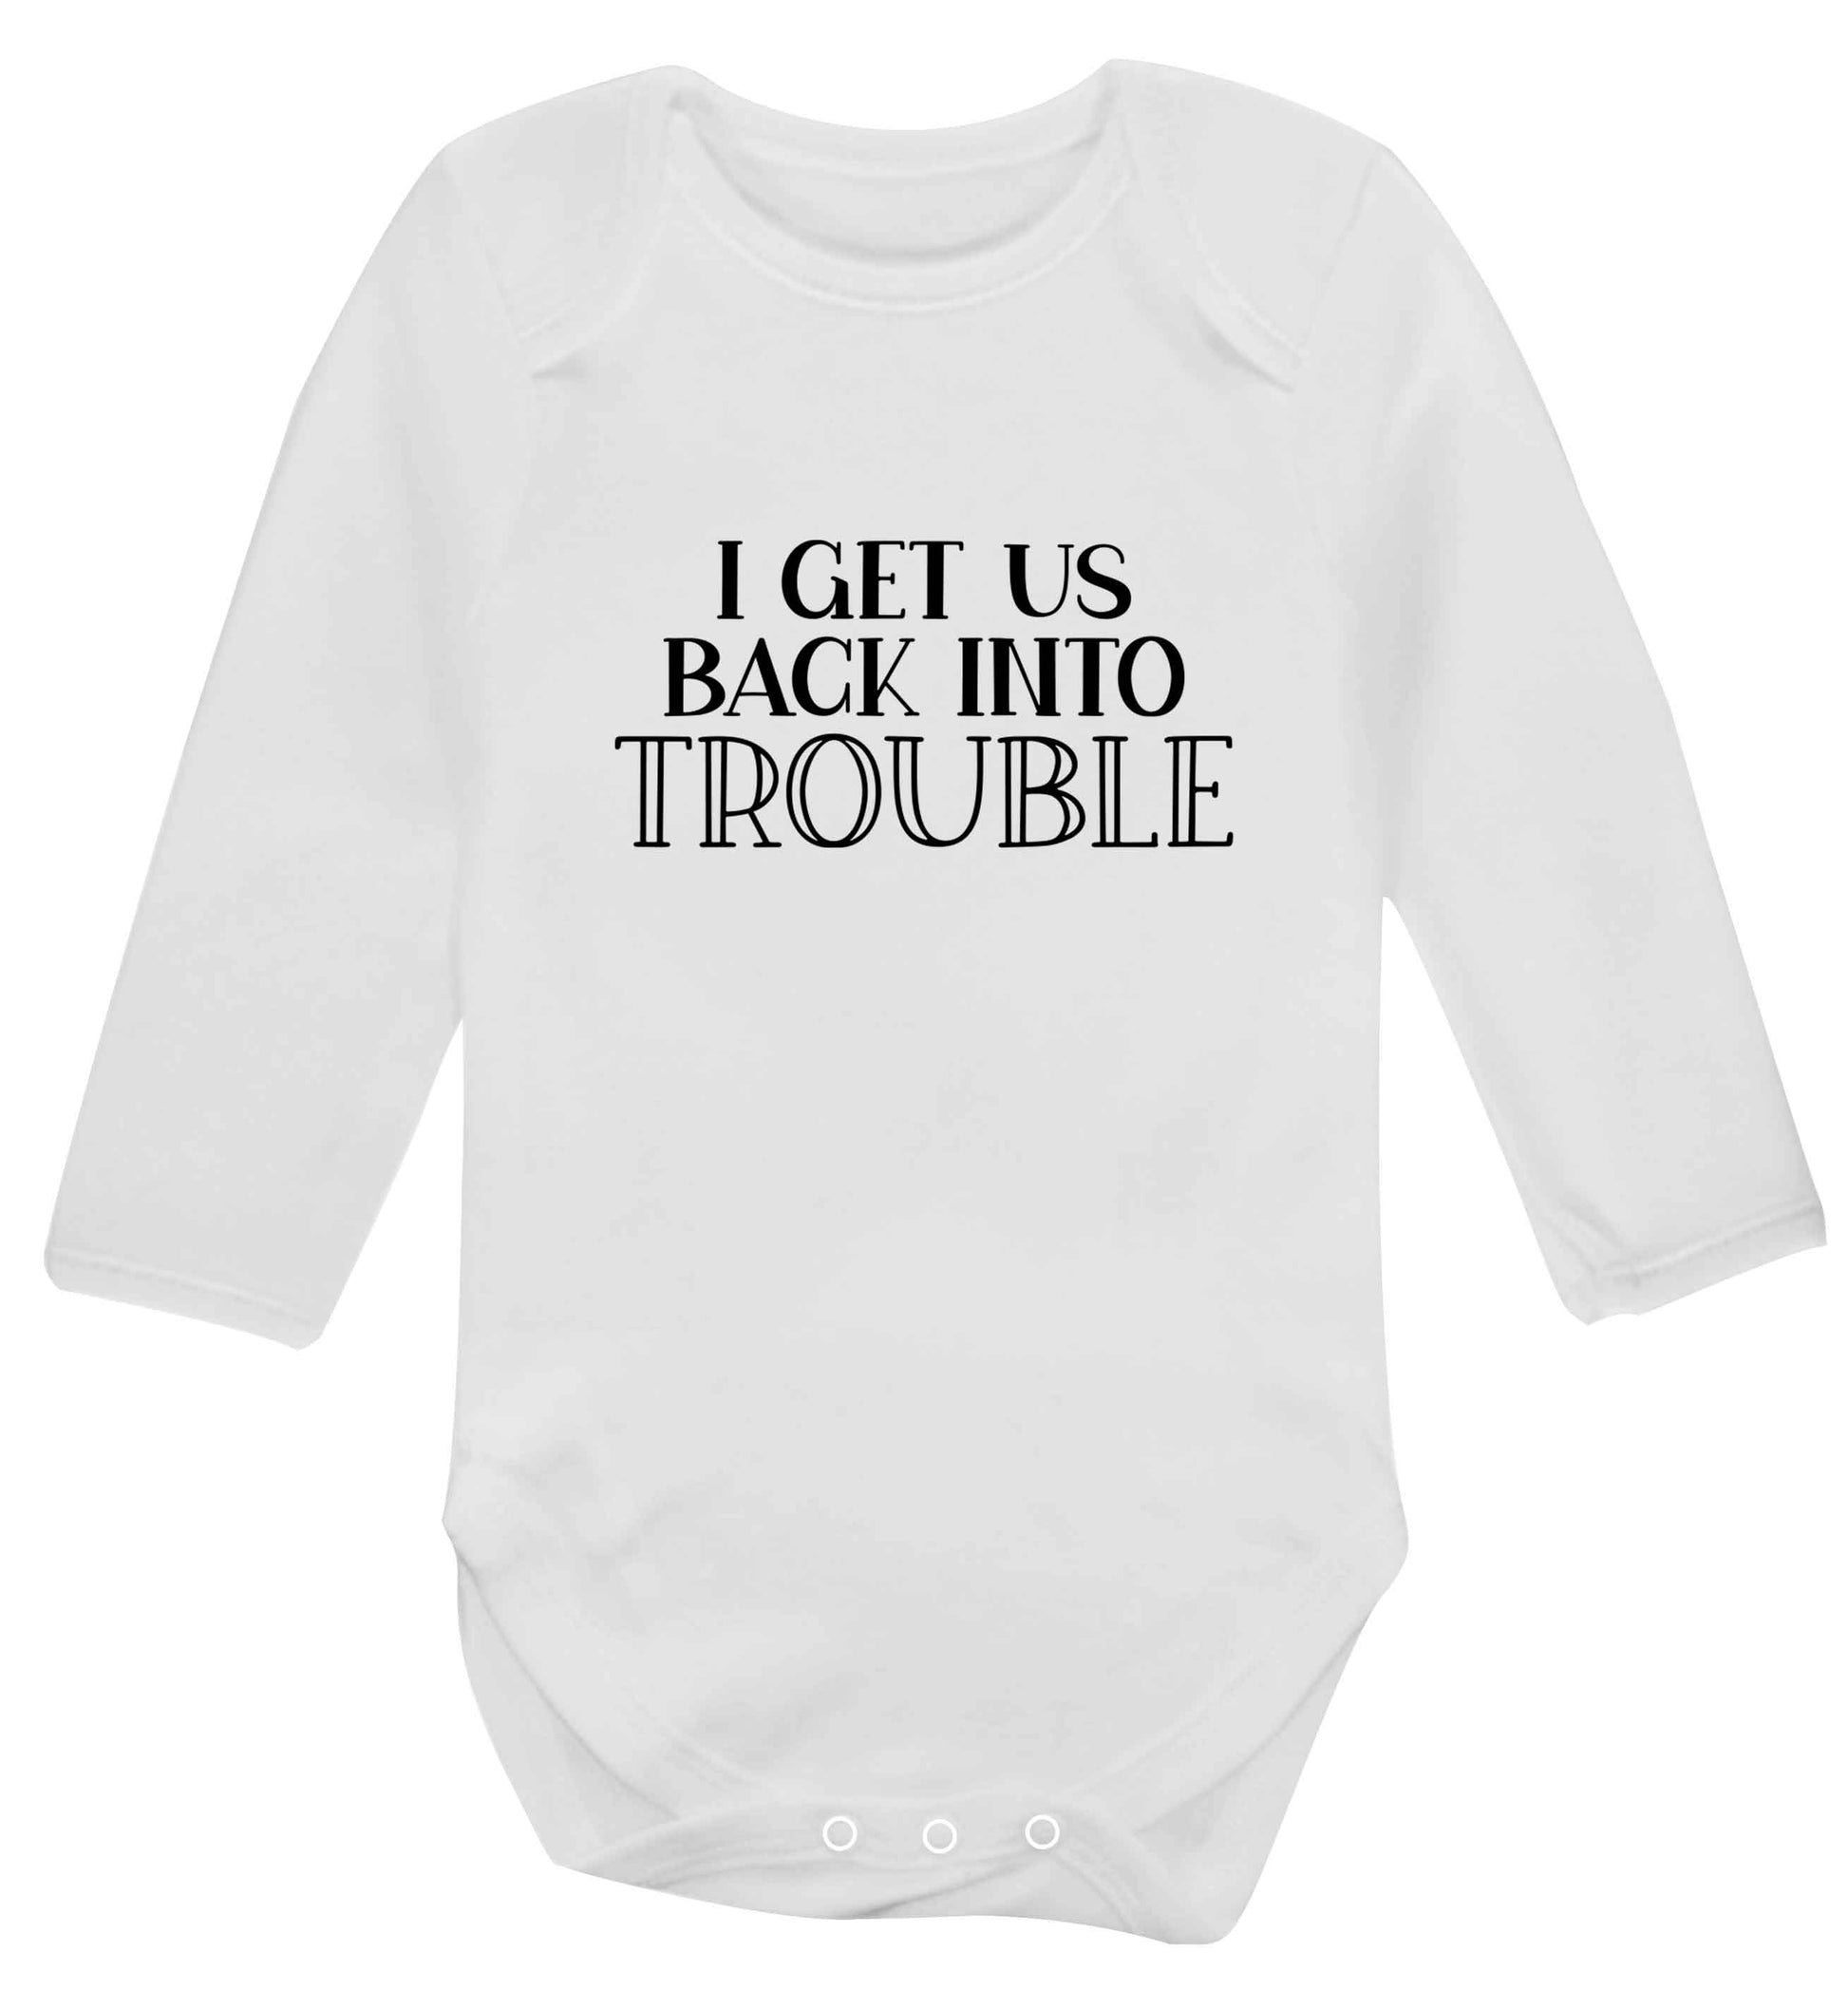 I get us back into trouble baby vest long sleeved white 6-12 months